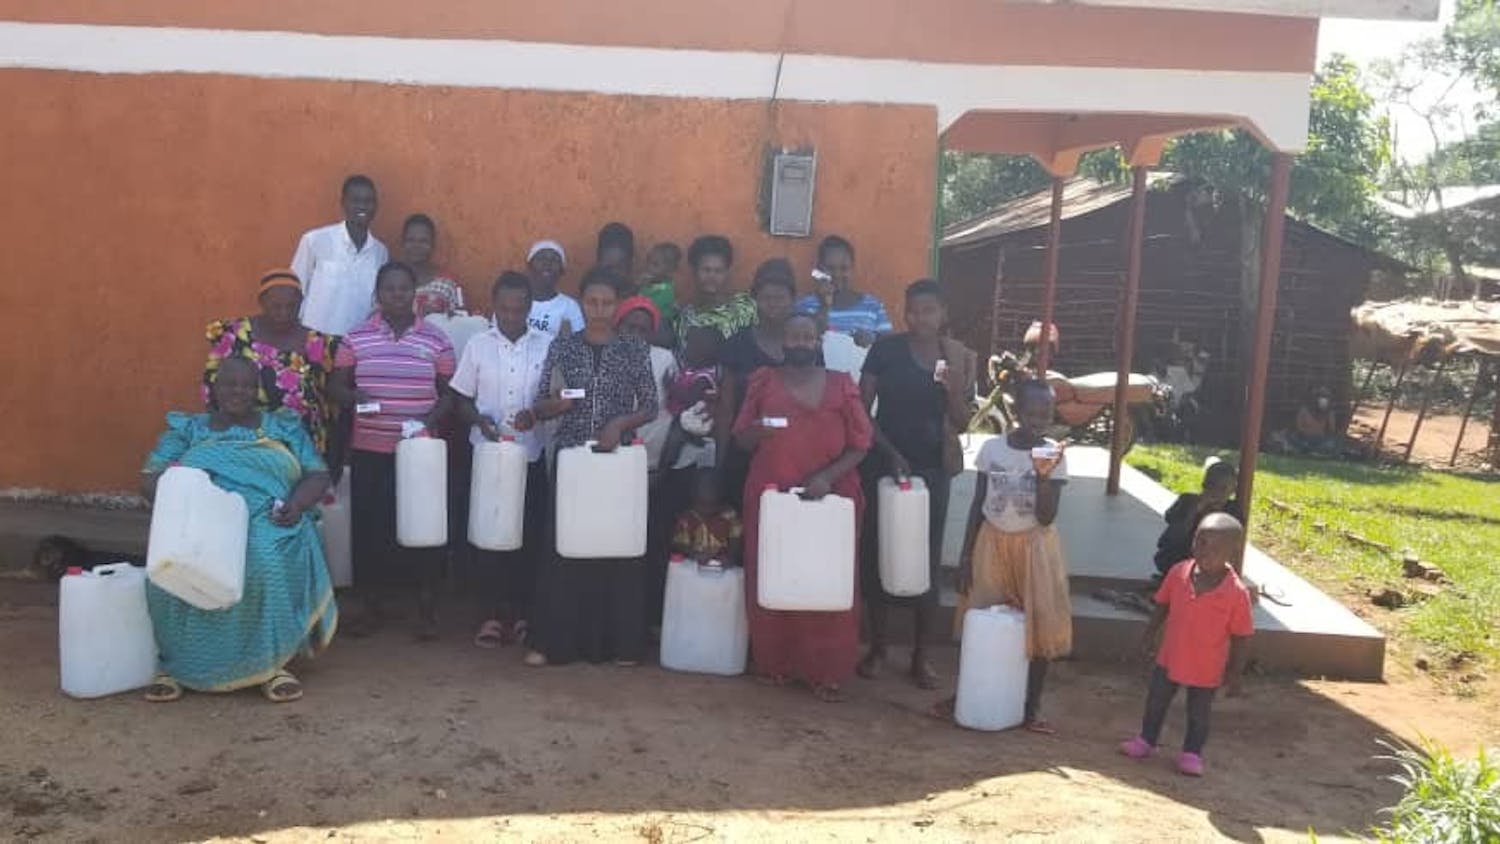 Ekisinga Ministries, pictured here in Buwenda, Uganda on Aug. 25, 2021, works with local churches to gauge the needs of the community and provide sustainable safe water solutions. Courtesy of Steve Nutzmann. 